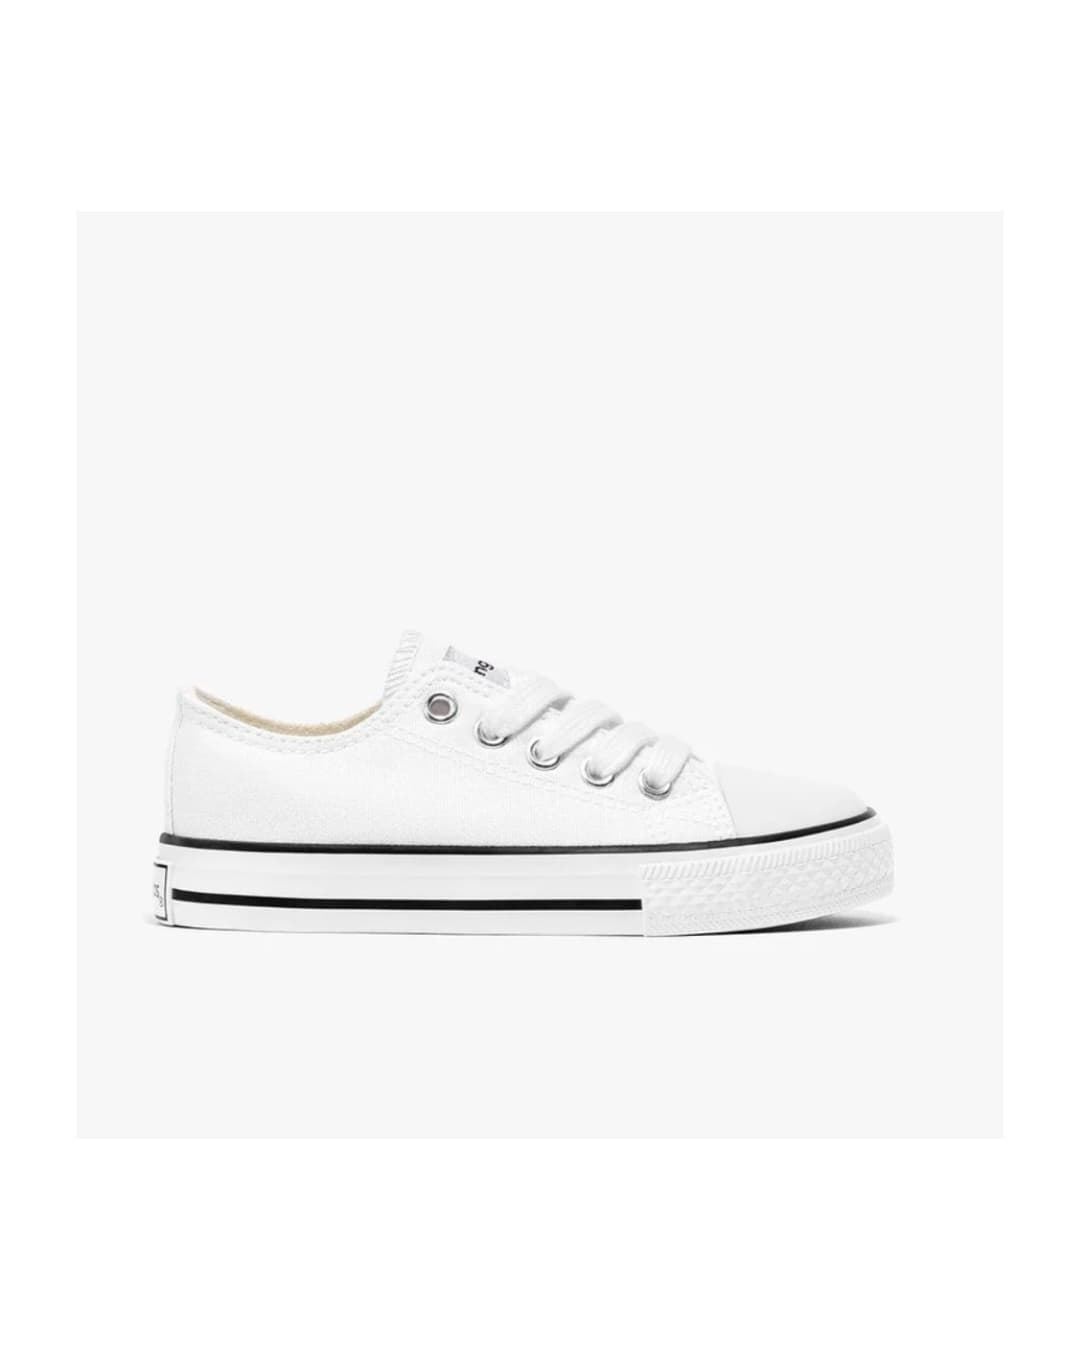 Conguitos Classic Canvas Sneakers White Kids - Image 1